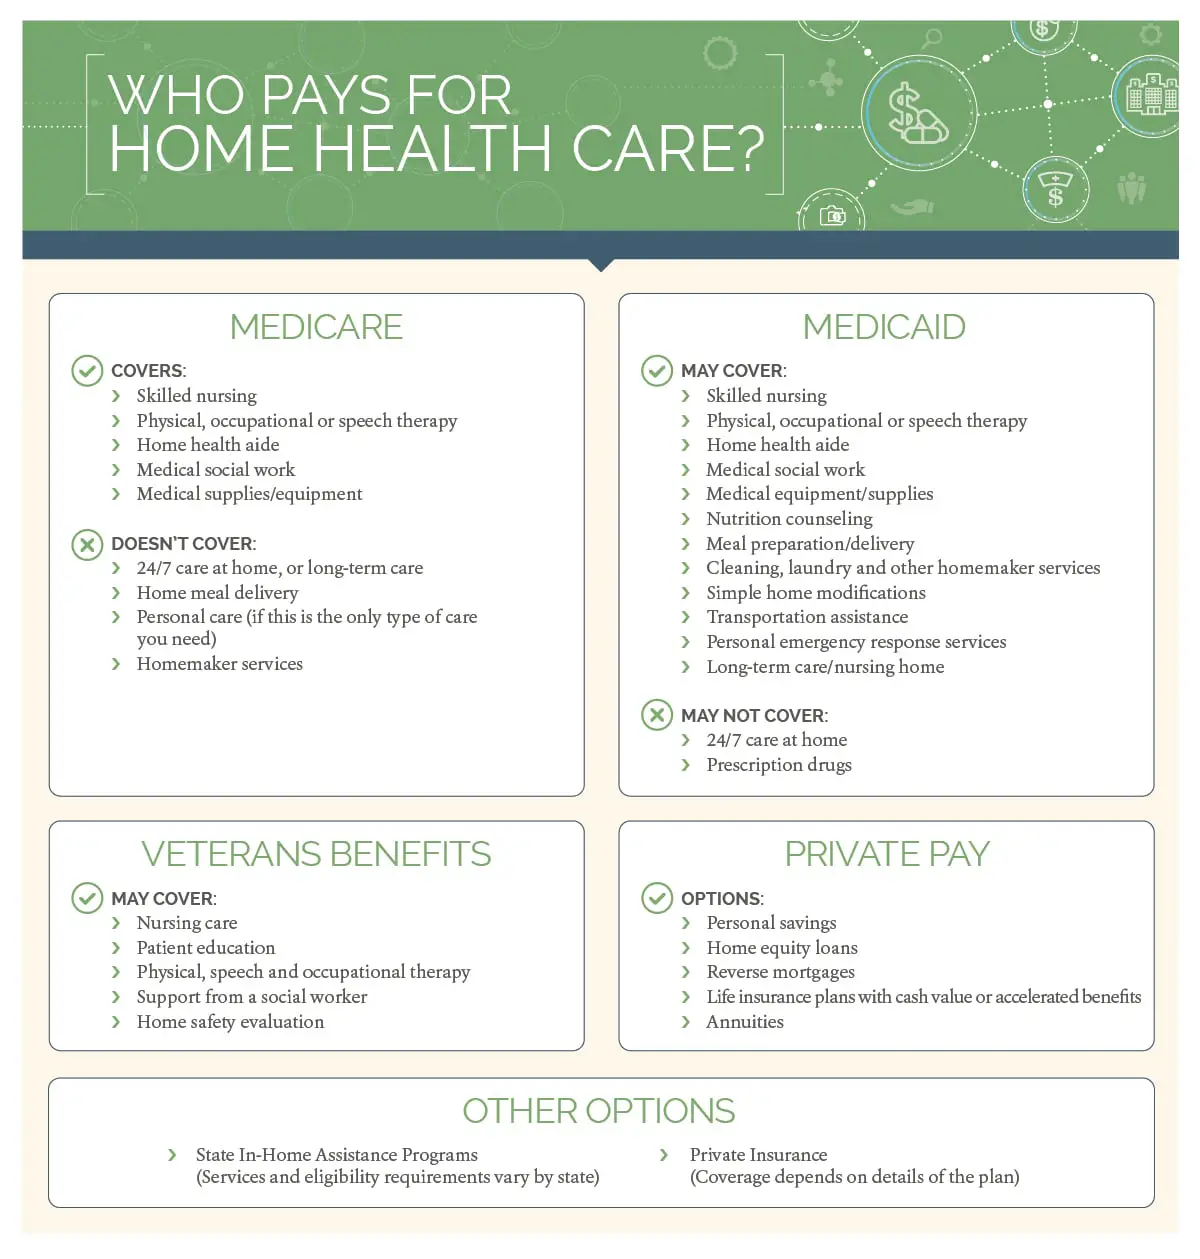 Does Medicare Or Medicaid Pay For Home Health Care